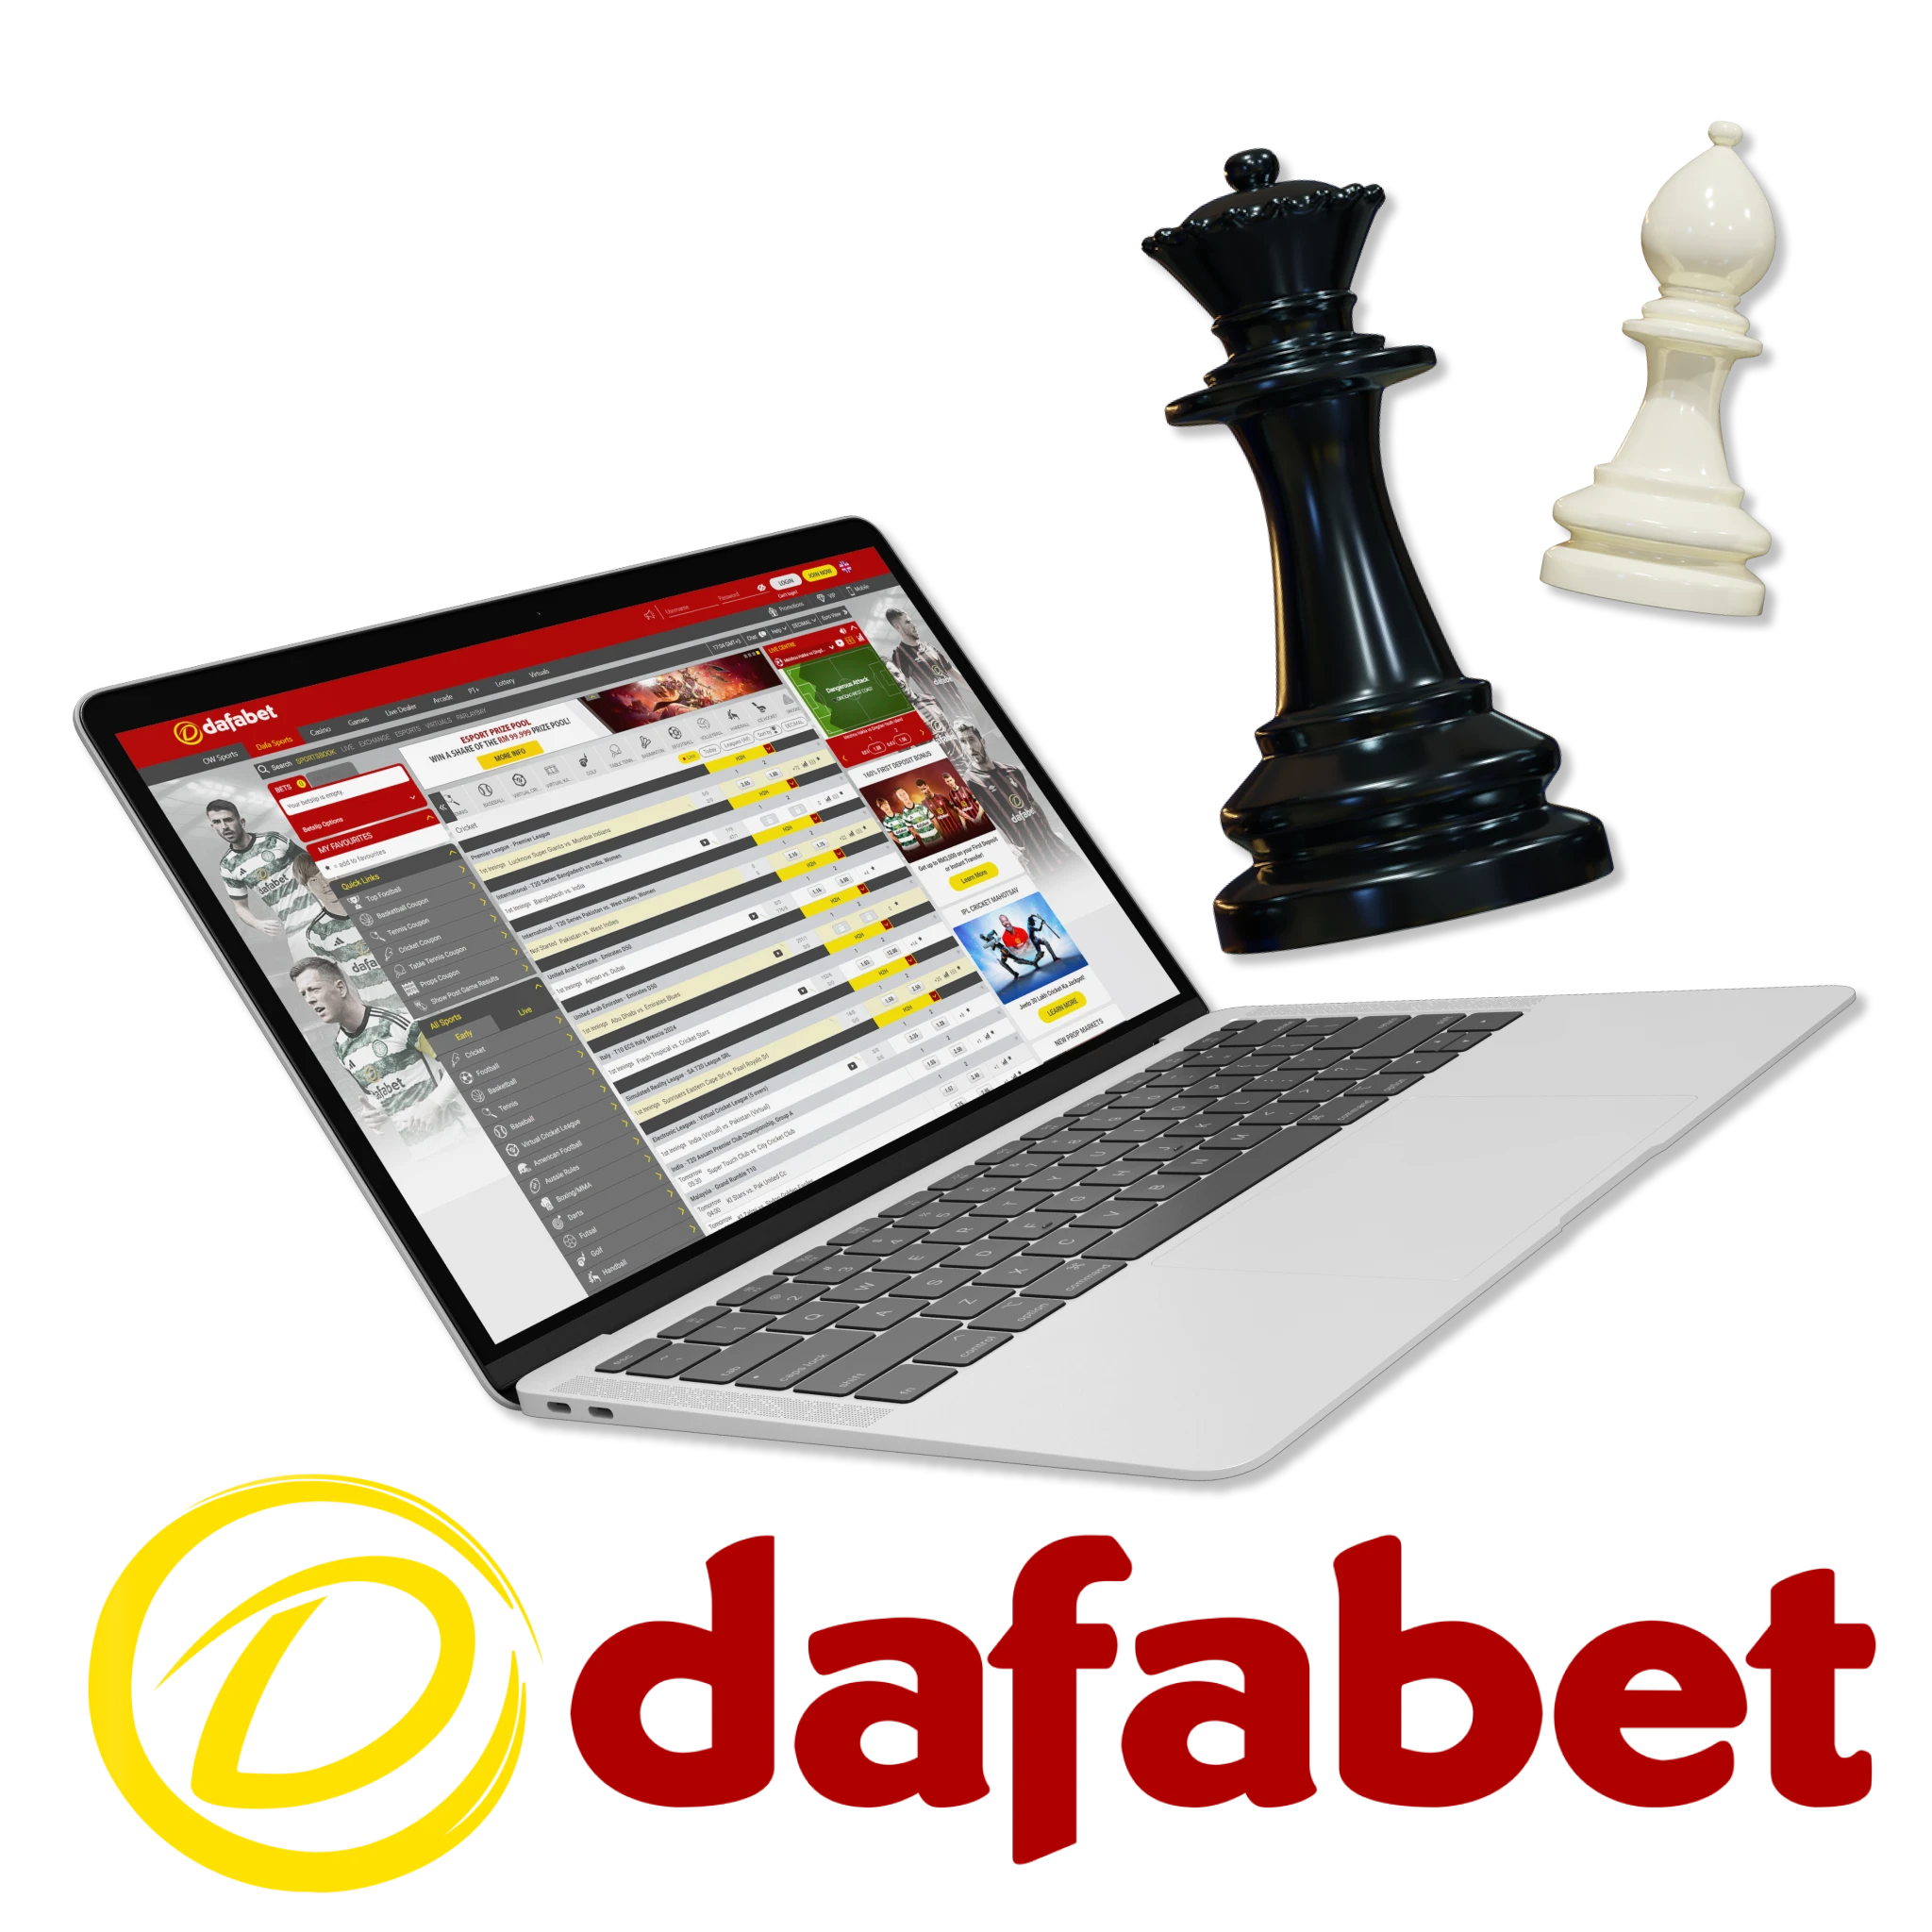 Chess betting is a nice decision, and by using Dafabet, you can rest assured you made the right choice.